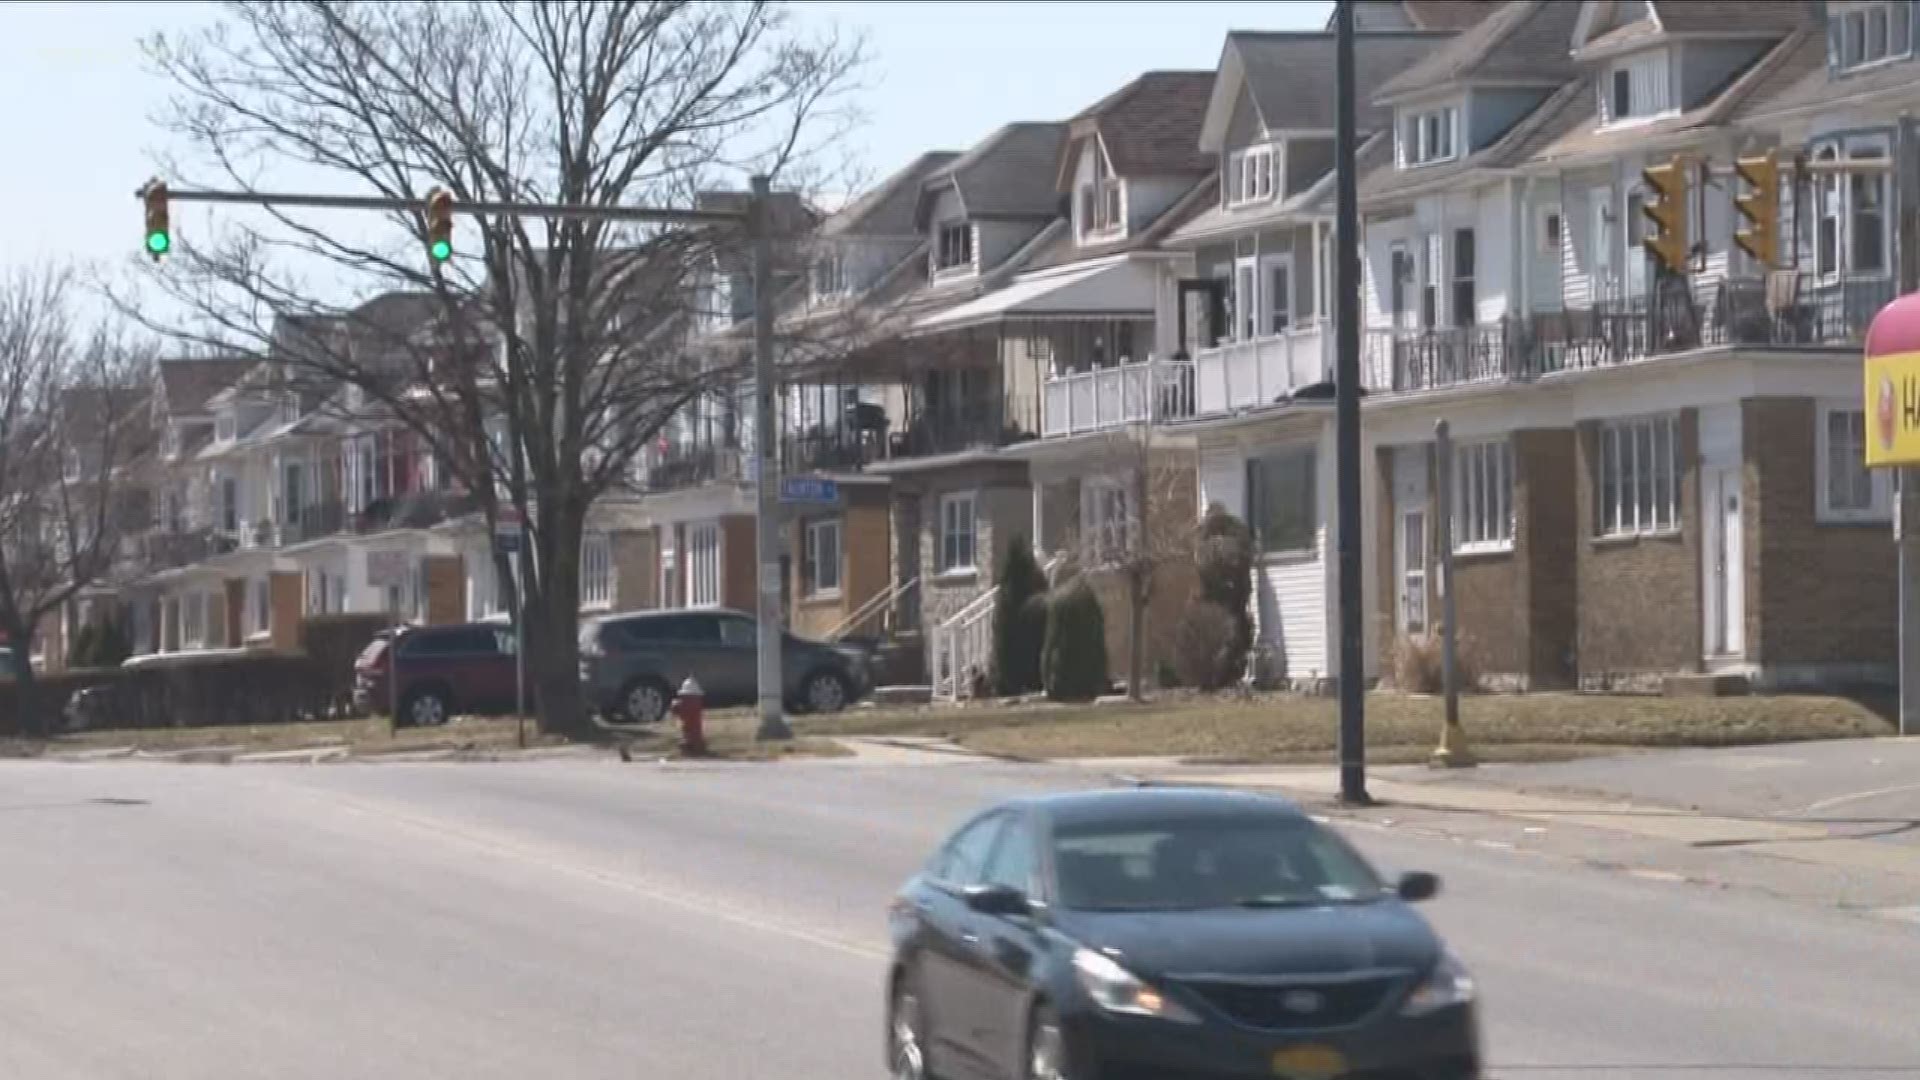 More than 400 homes have already been removed from The City's Foreclosure list...